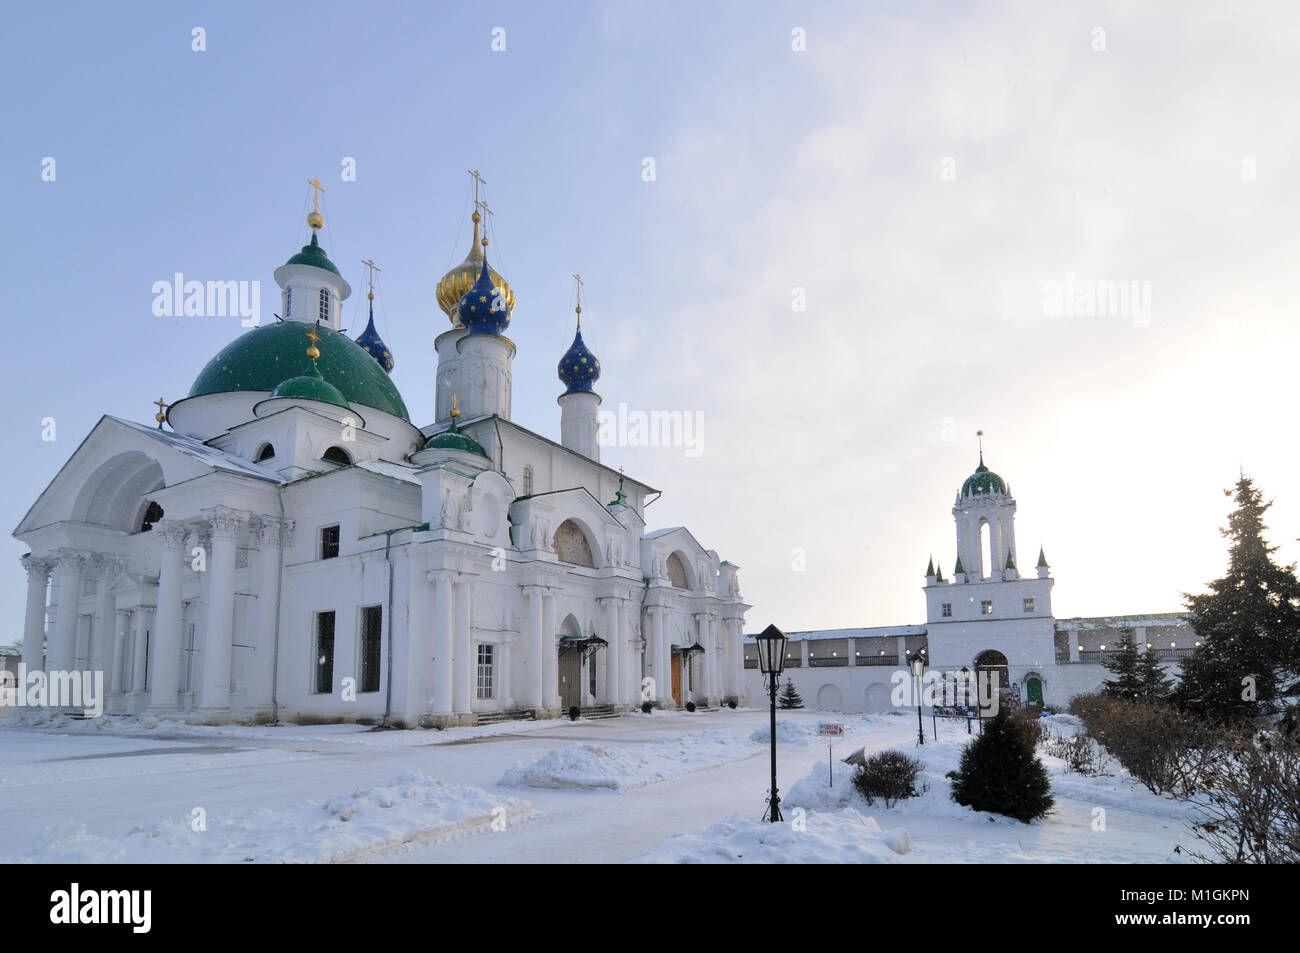 Spaso-Yakovlevsky Monastery on the outskirts of Rostov, Russia, along the Golden Ring. Built in the neoclassical style. Stock Photo